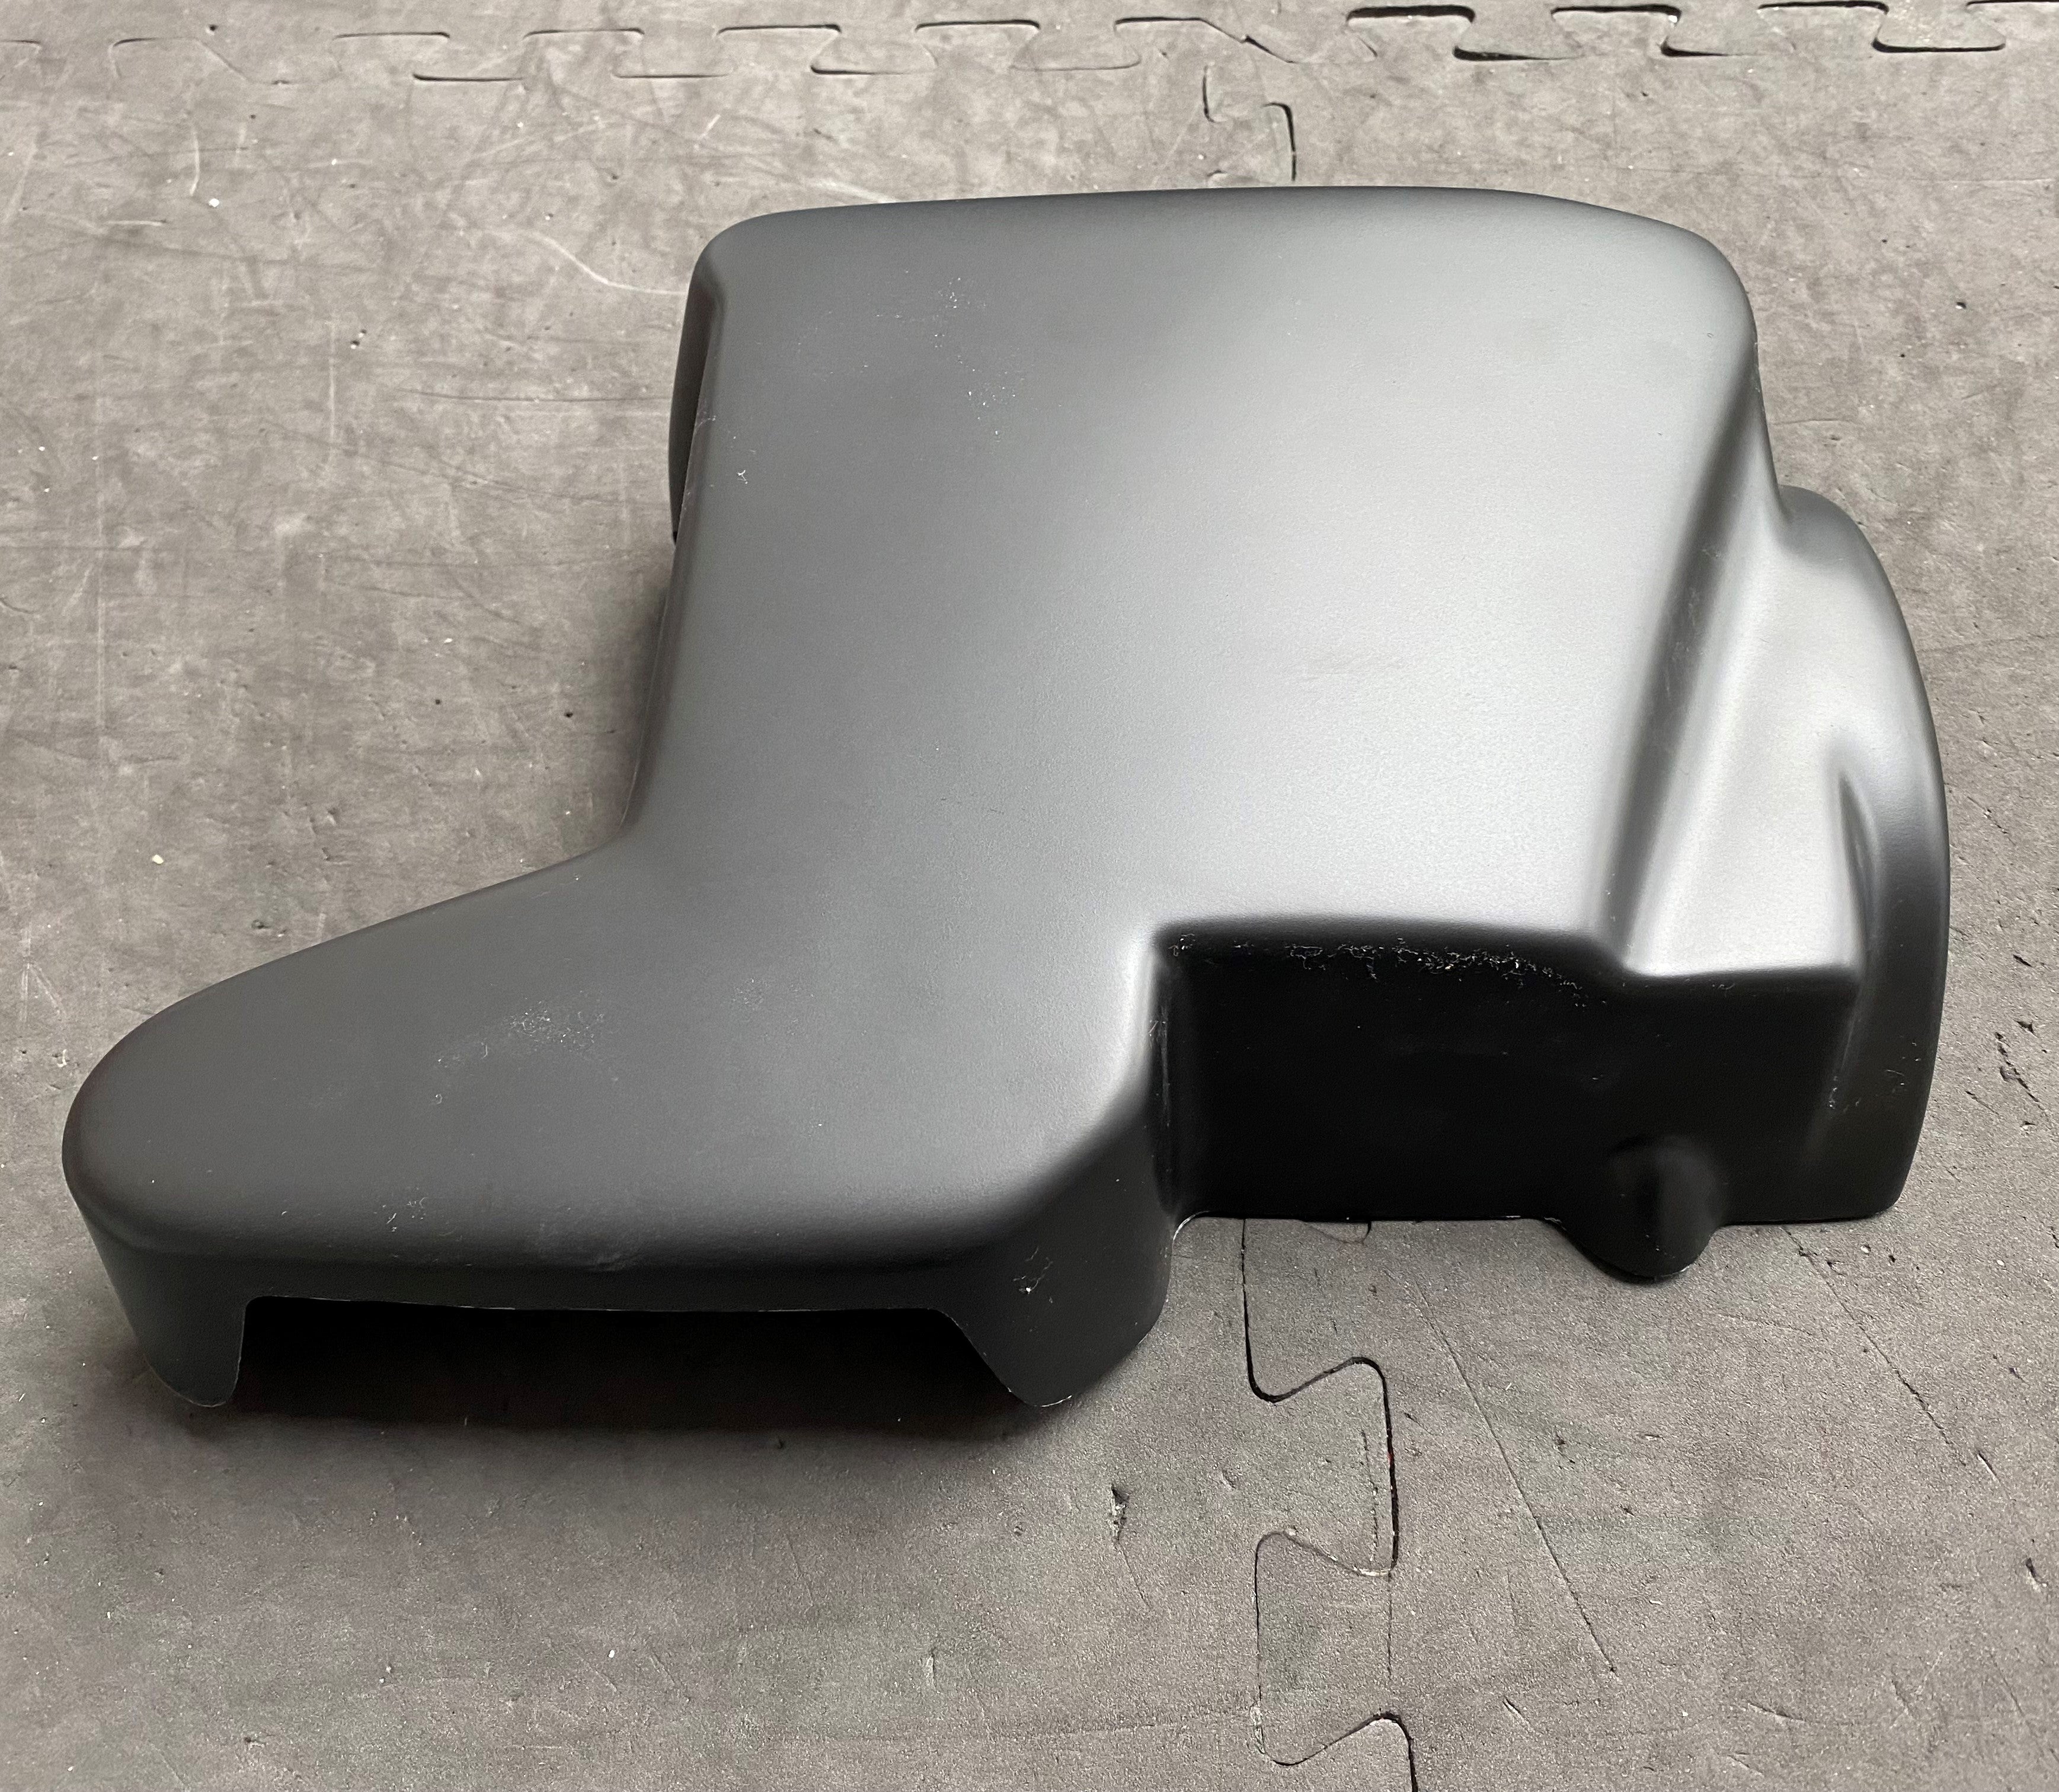 Proform Airbox Cover - Volvo C30 Petrol (Petrol Finishes)